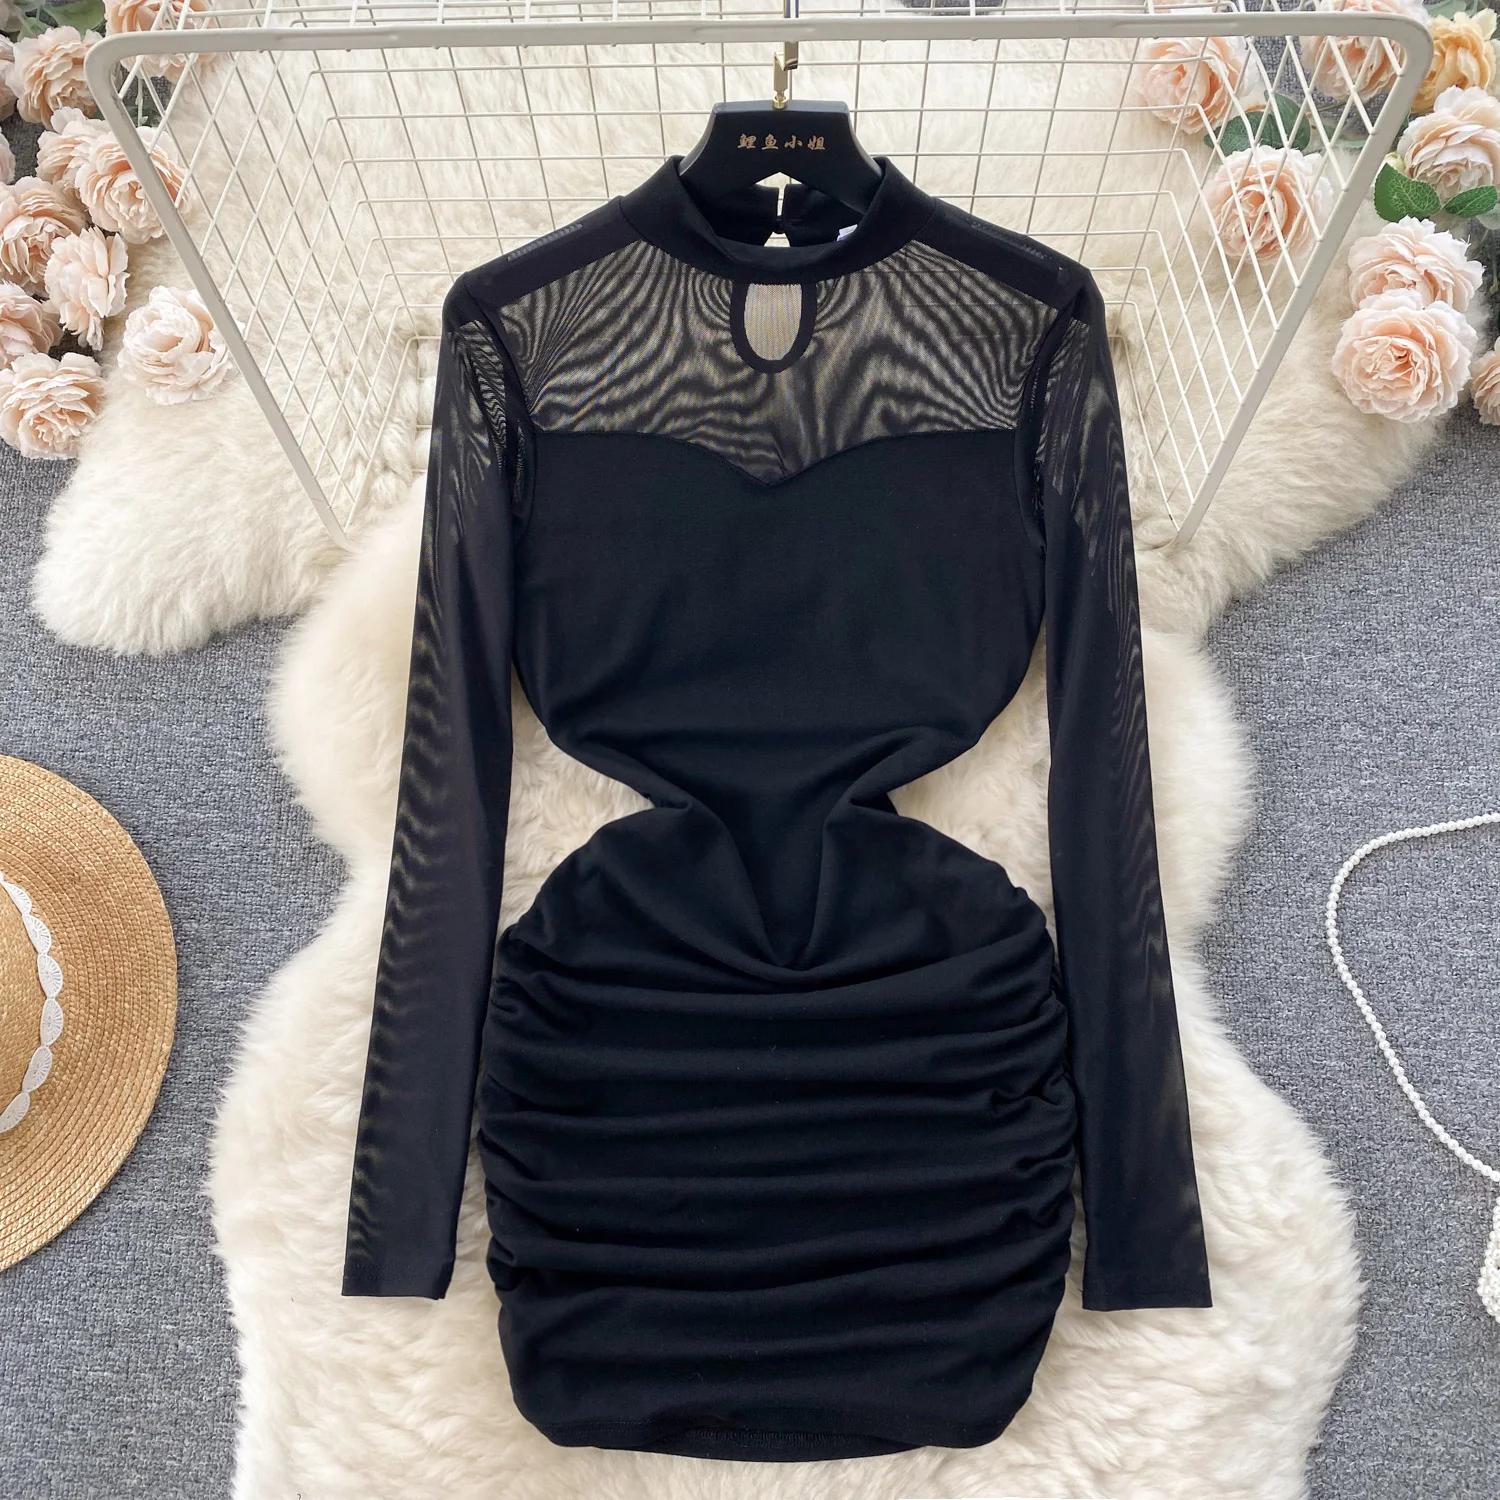 

Foamlina Black Dress Women Fashion Spring Autumn Sexy See Through Mesh Long Sleeve Stand Collar Slim Bodycon Ruched Club Outfits